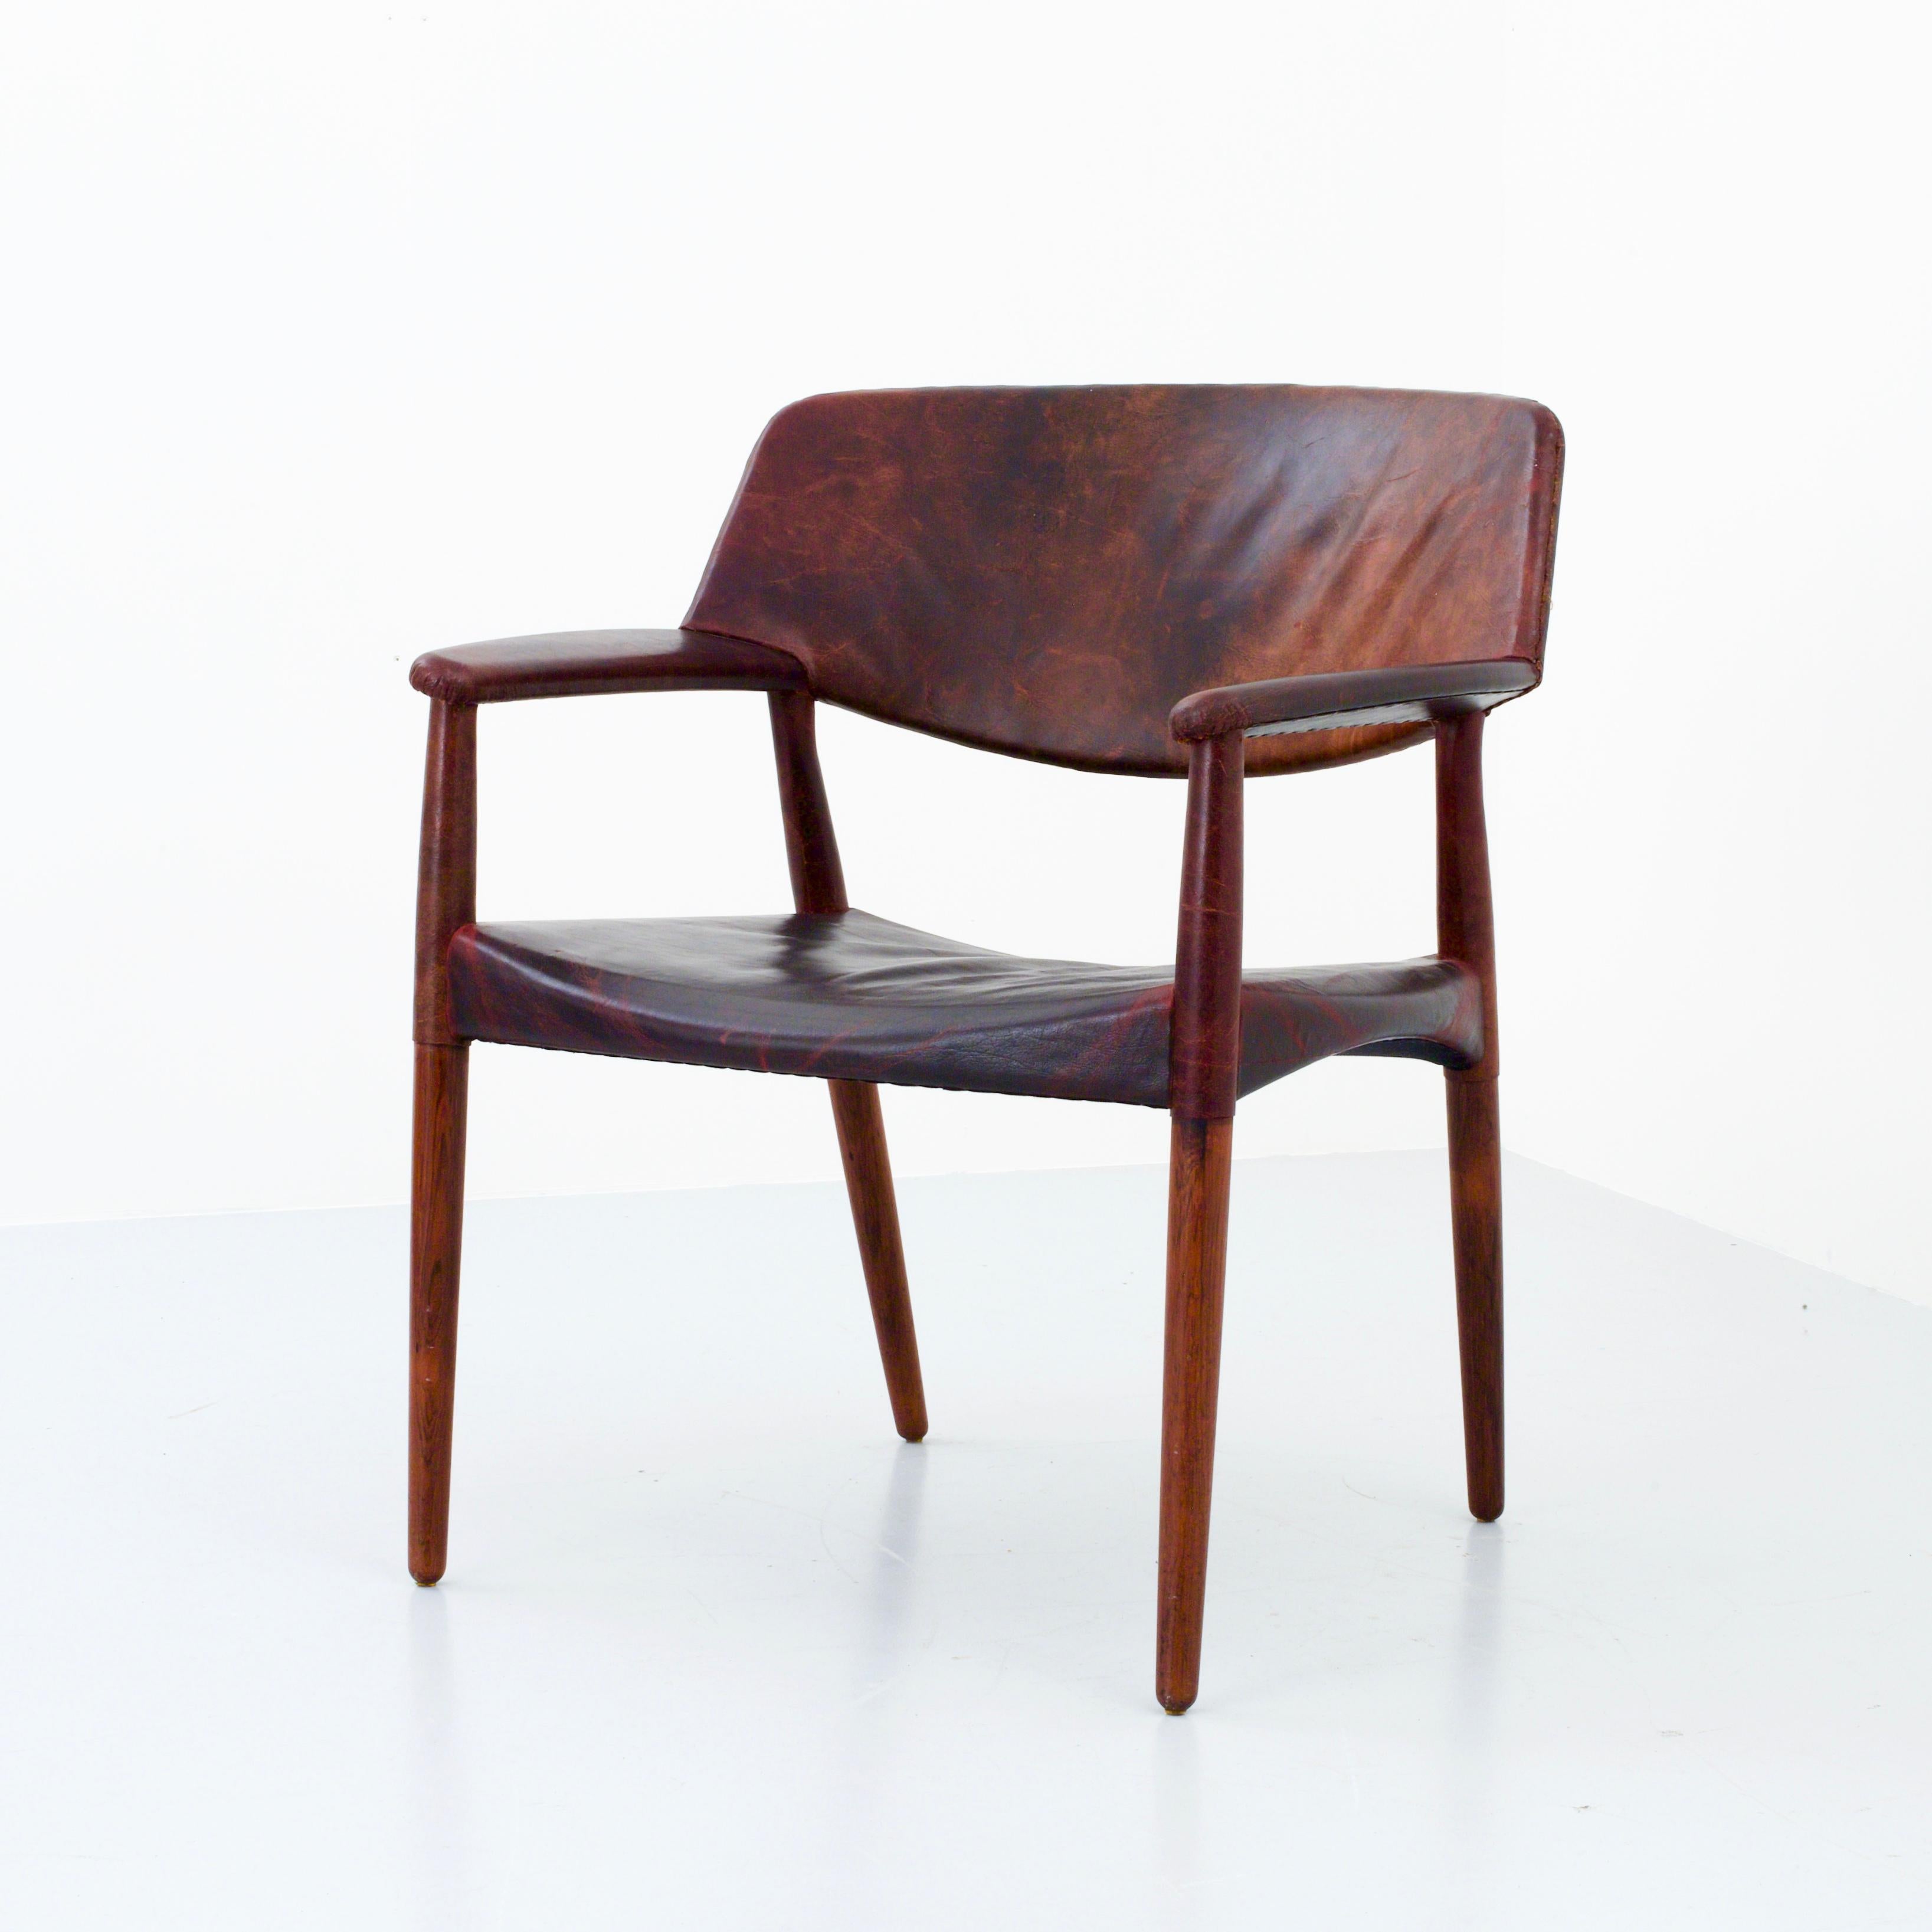 Lounge chair by Ejner Larsen and Aksel Bender Madsen in patinated leather and rosewood by Cabinetmaker Willy Beck, Denmark, 1950s

Very nicely patinated lounge chair / large armchair in dark brown leather. This leather is from the 1950's and over